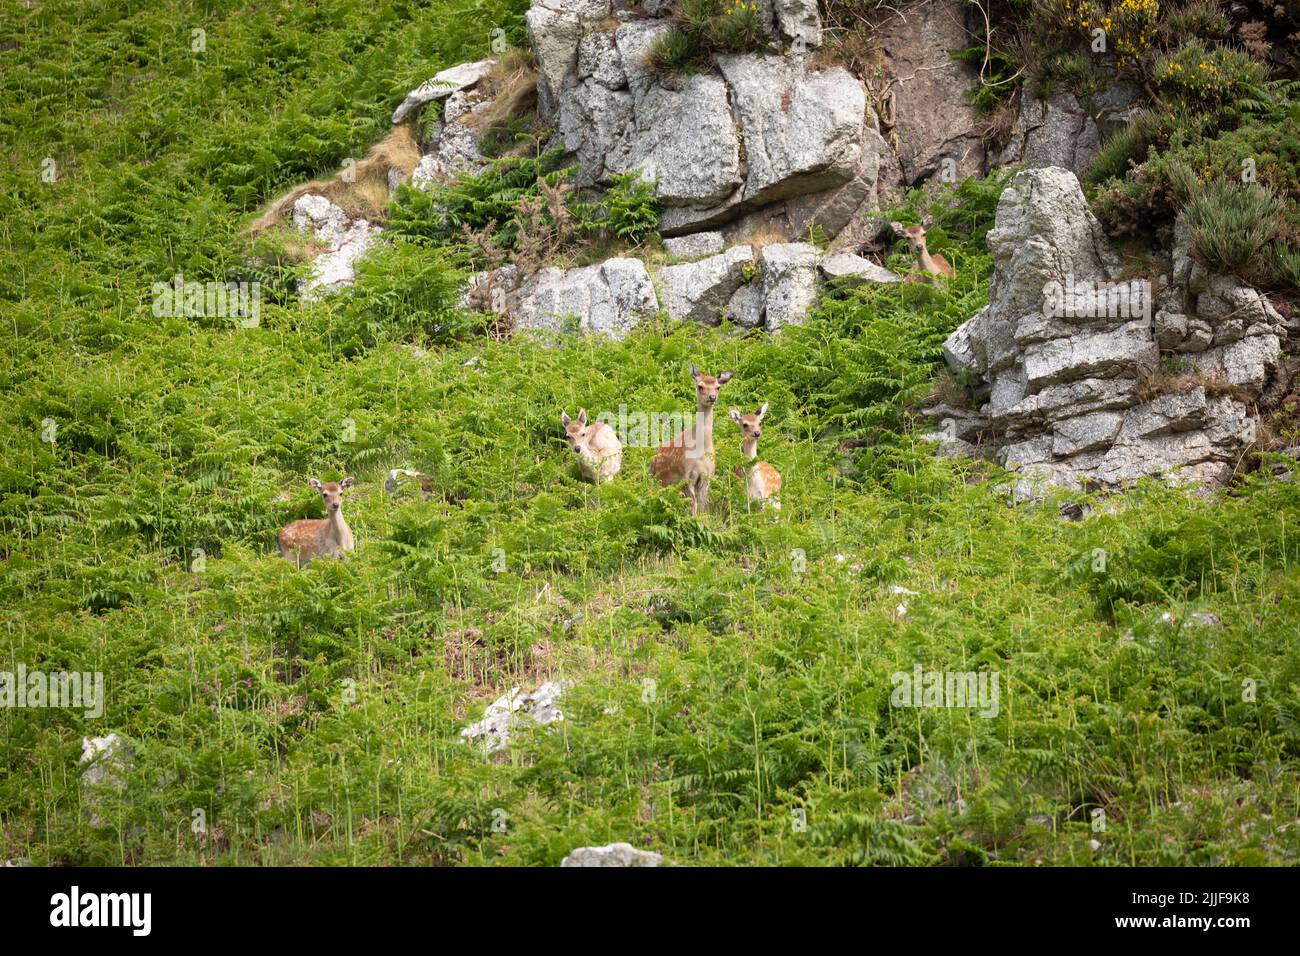 Group of spotted deer on Lundy Island, UK Stock Photo